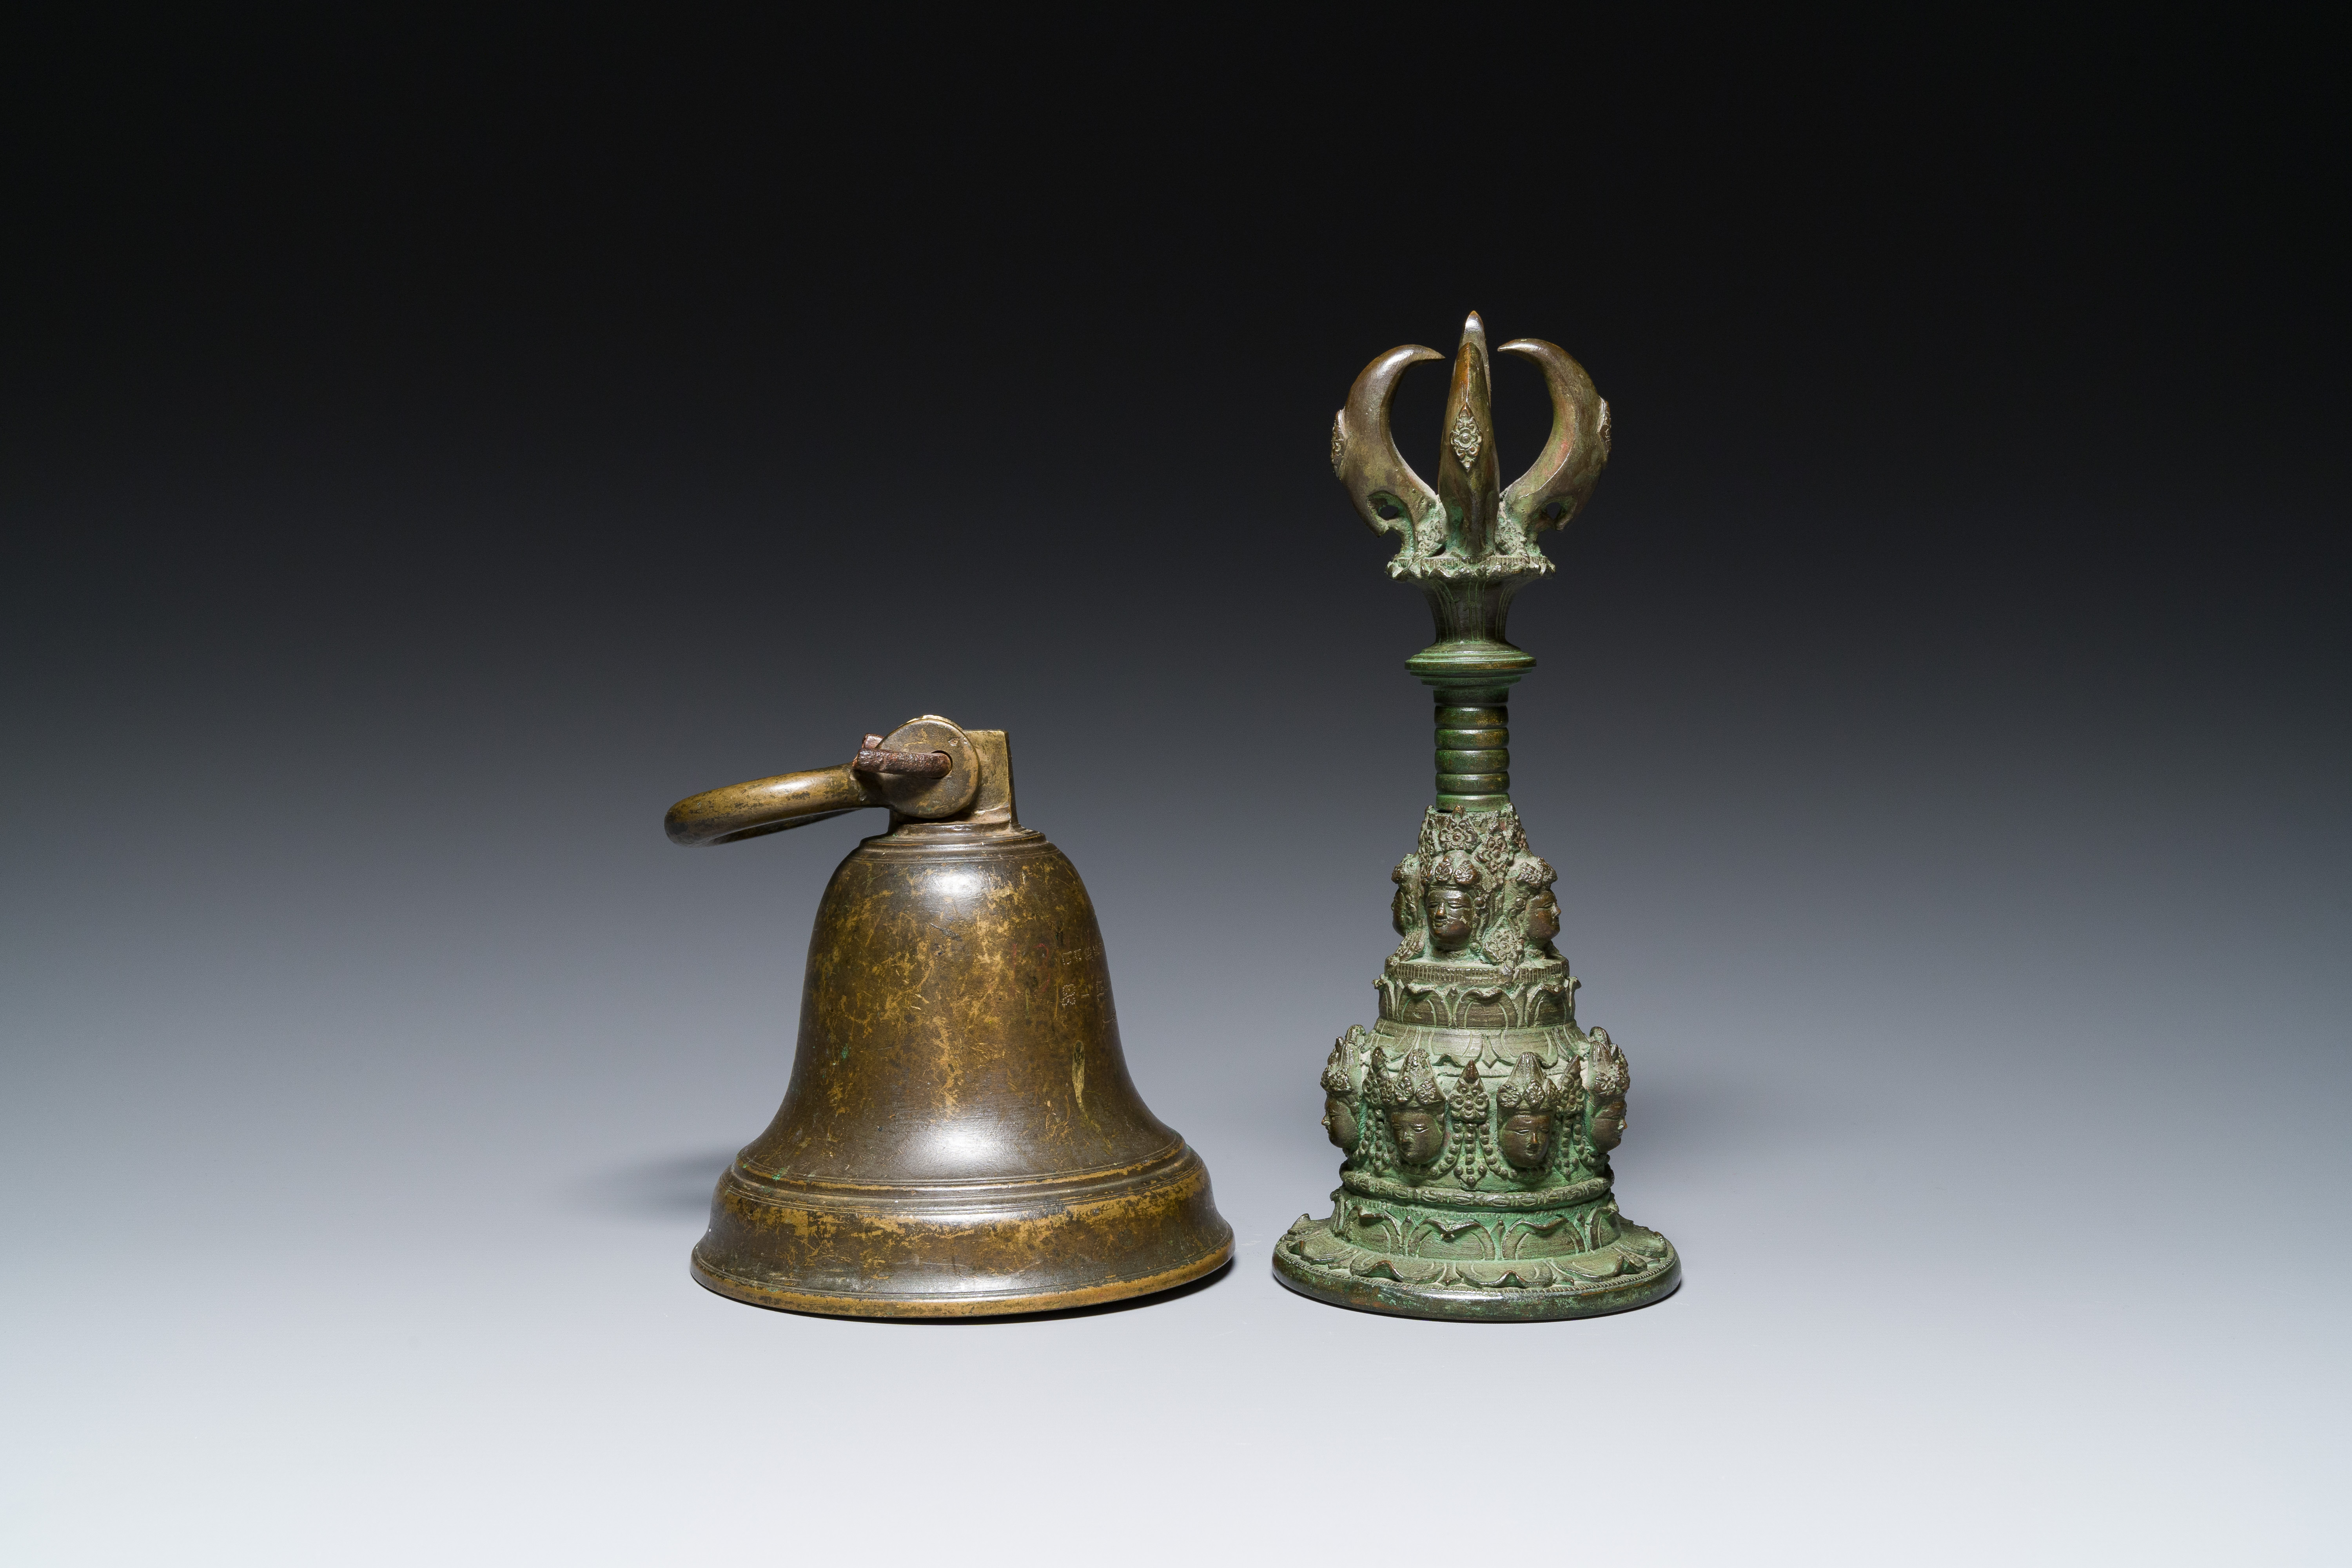 A bronze bell and a ceremonial hand bell, South Asia and Southeast Asia, 19th C. or earlier - Image 9 of 21